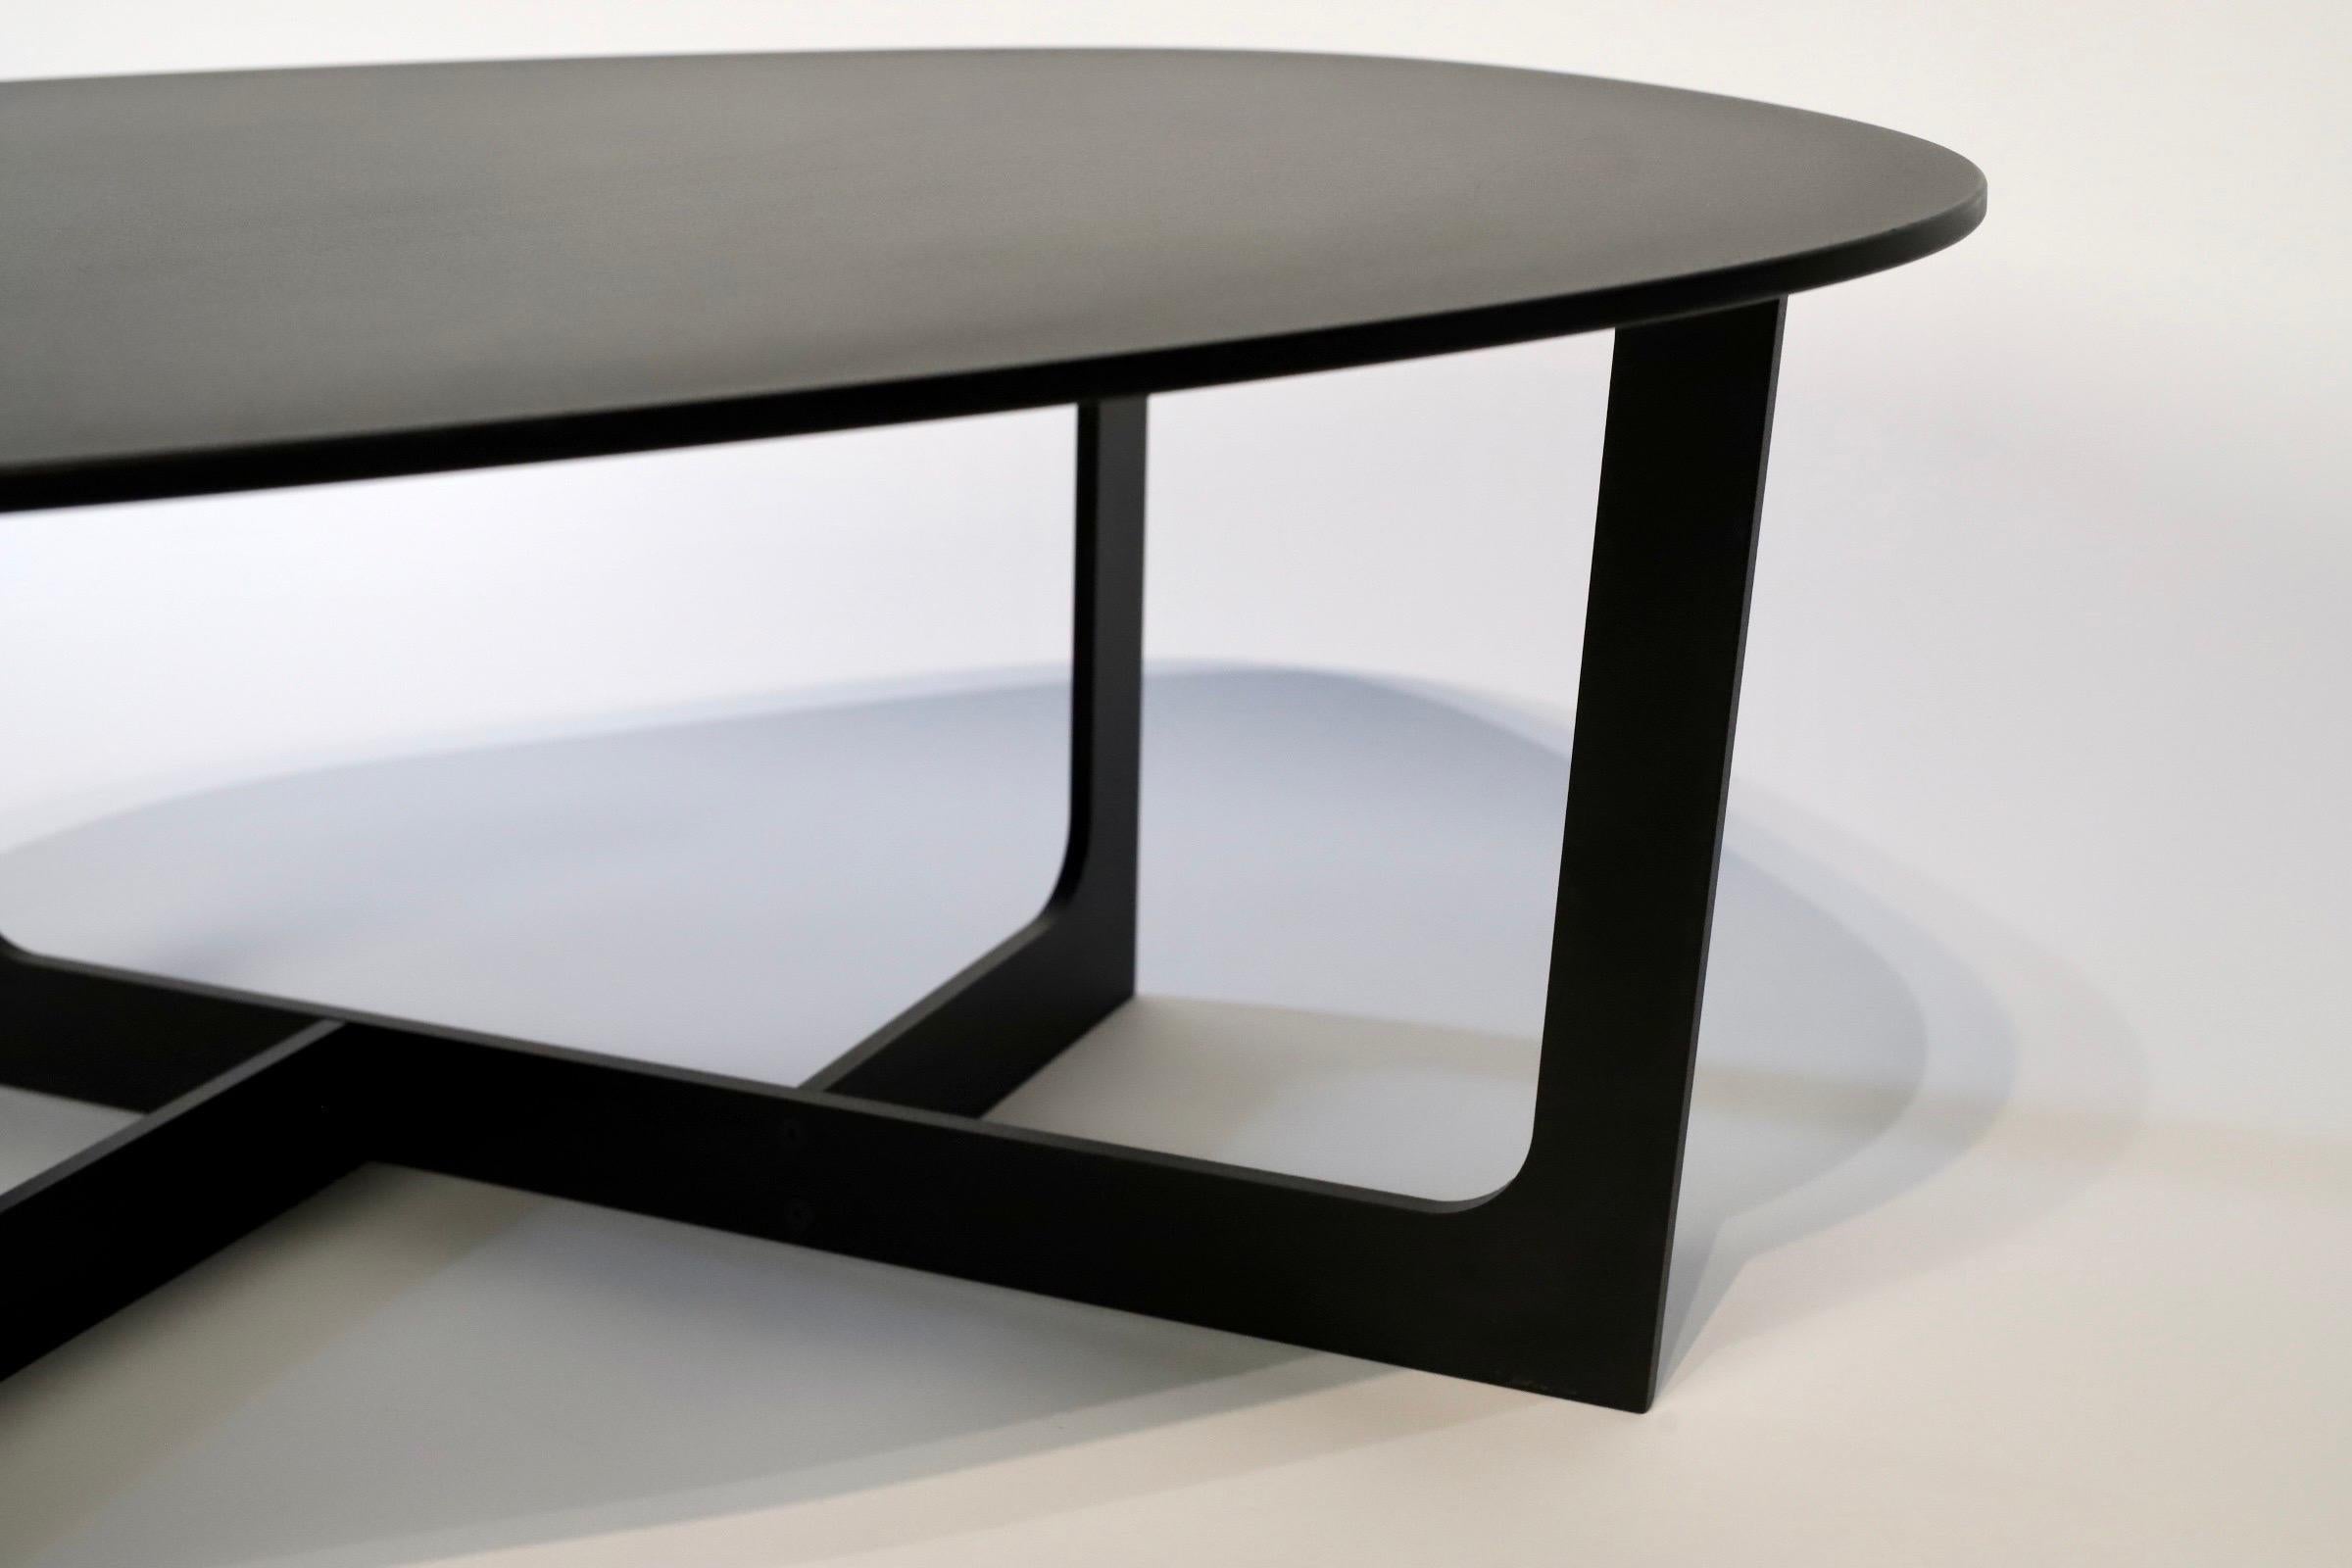 The Cocktail or End Table designed by Ernst & Jensen for Erik Jorgensen is a stunning piece that seamlessly blends form and function. Crafted with meticulous attention to detail, this table embodies the essence of Scandinavian design. Its clean